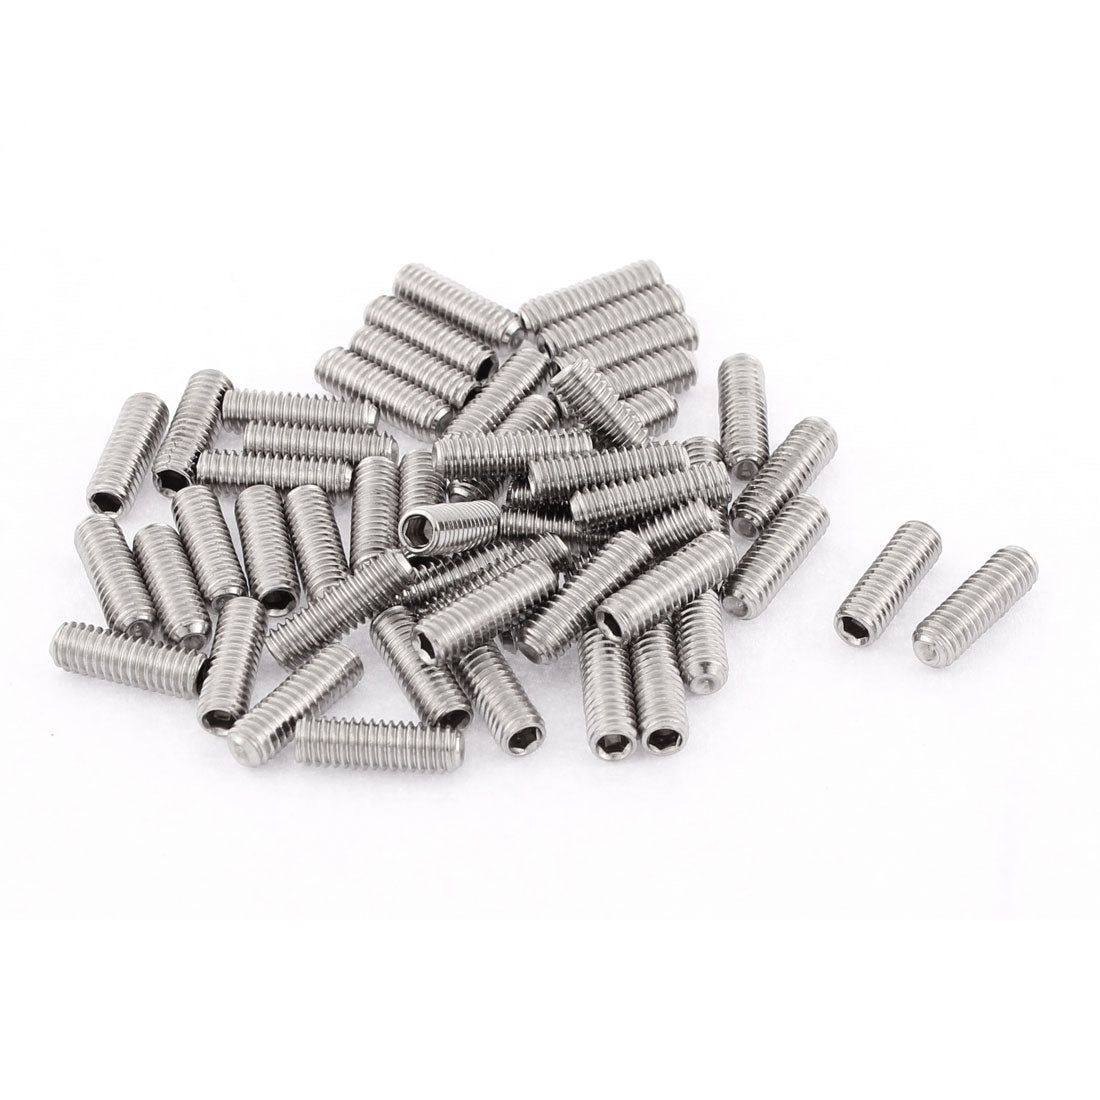 uxcell Uxcell M4x12mm Metric Stainless Steel Hex Socket Set Cup Point Grub Screws Silver Tone Towel Rack Door Knob 50pcs